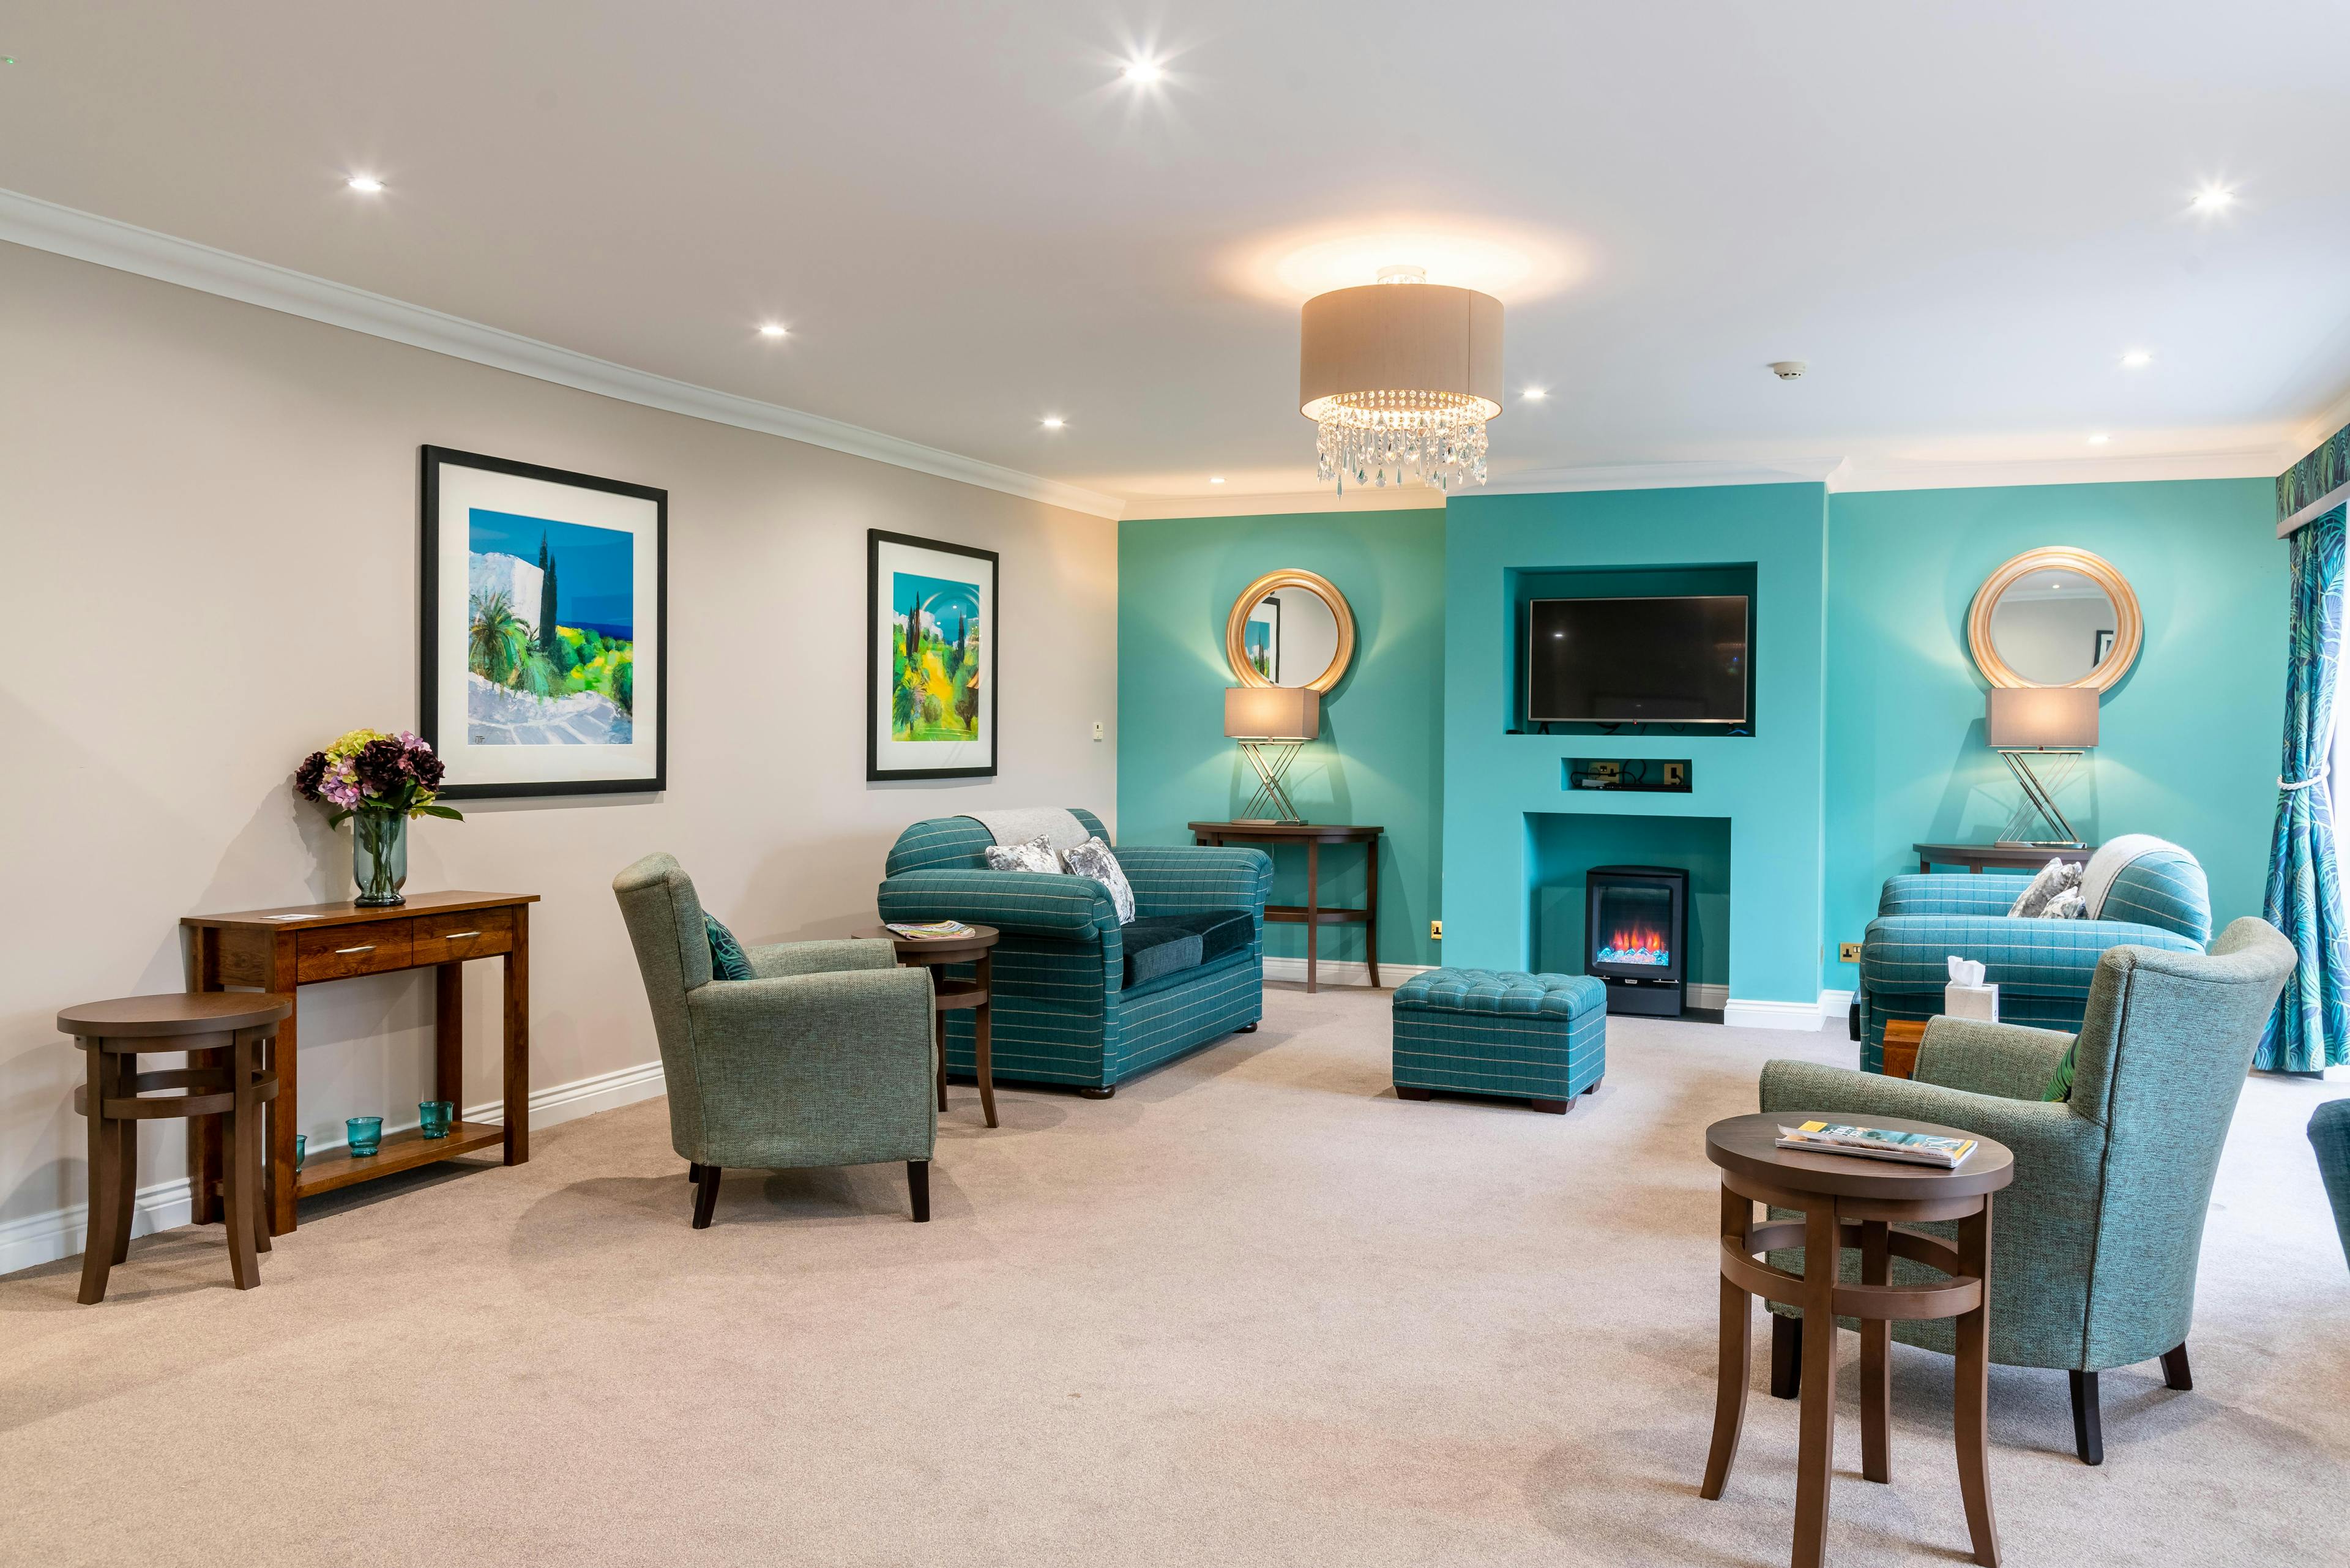 Communal Lounge at Tandridge Heights Care Home in Oxted, Surrey